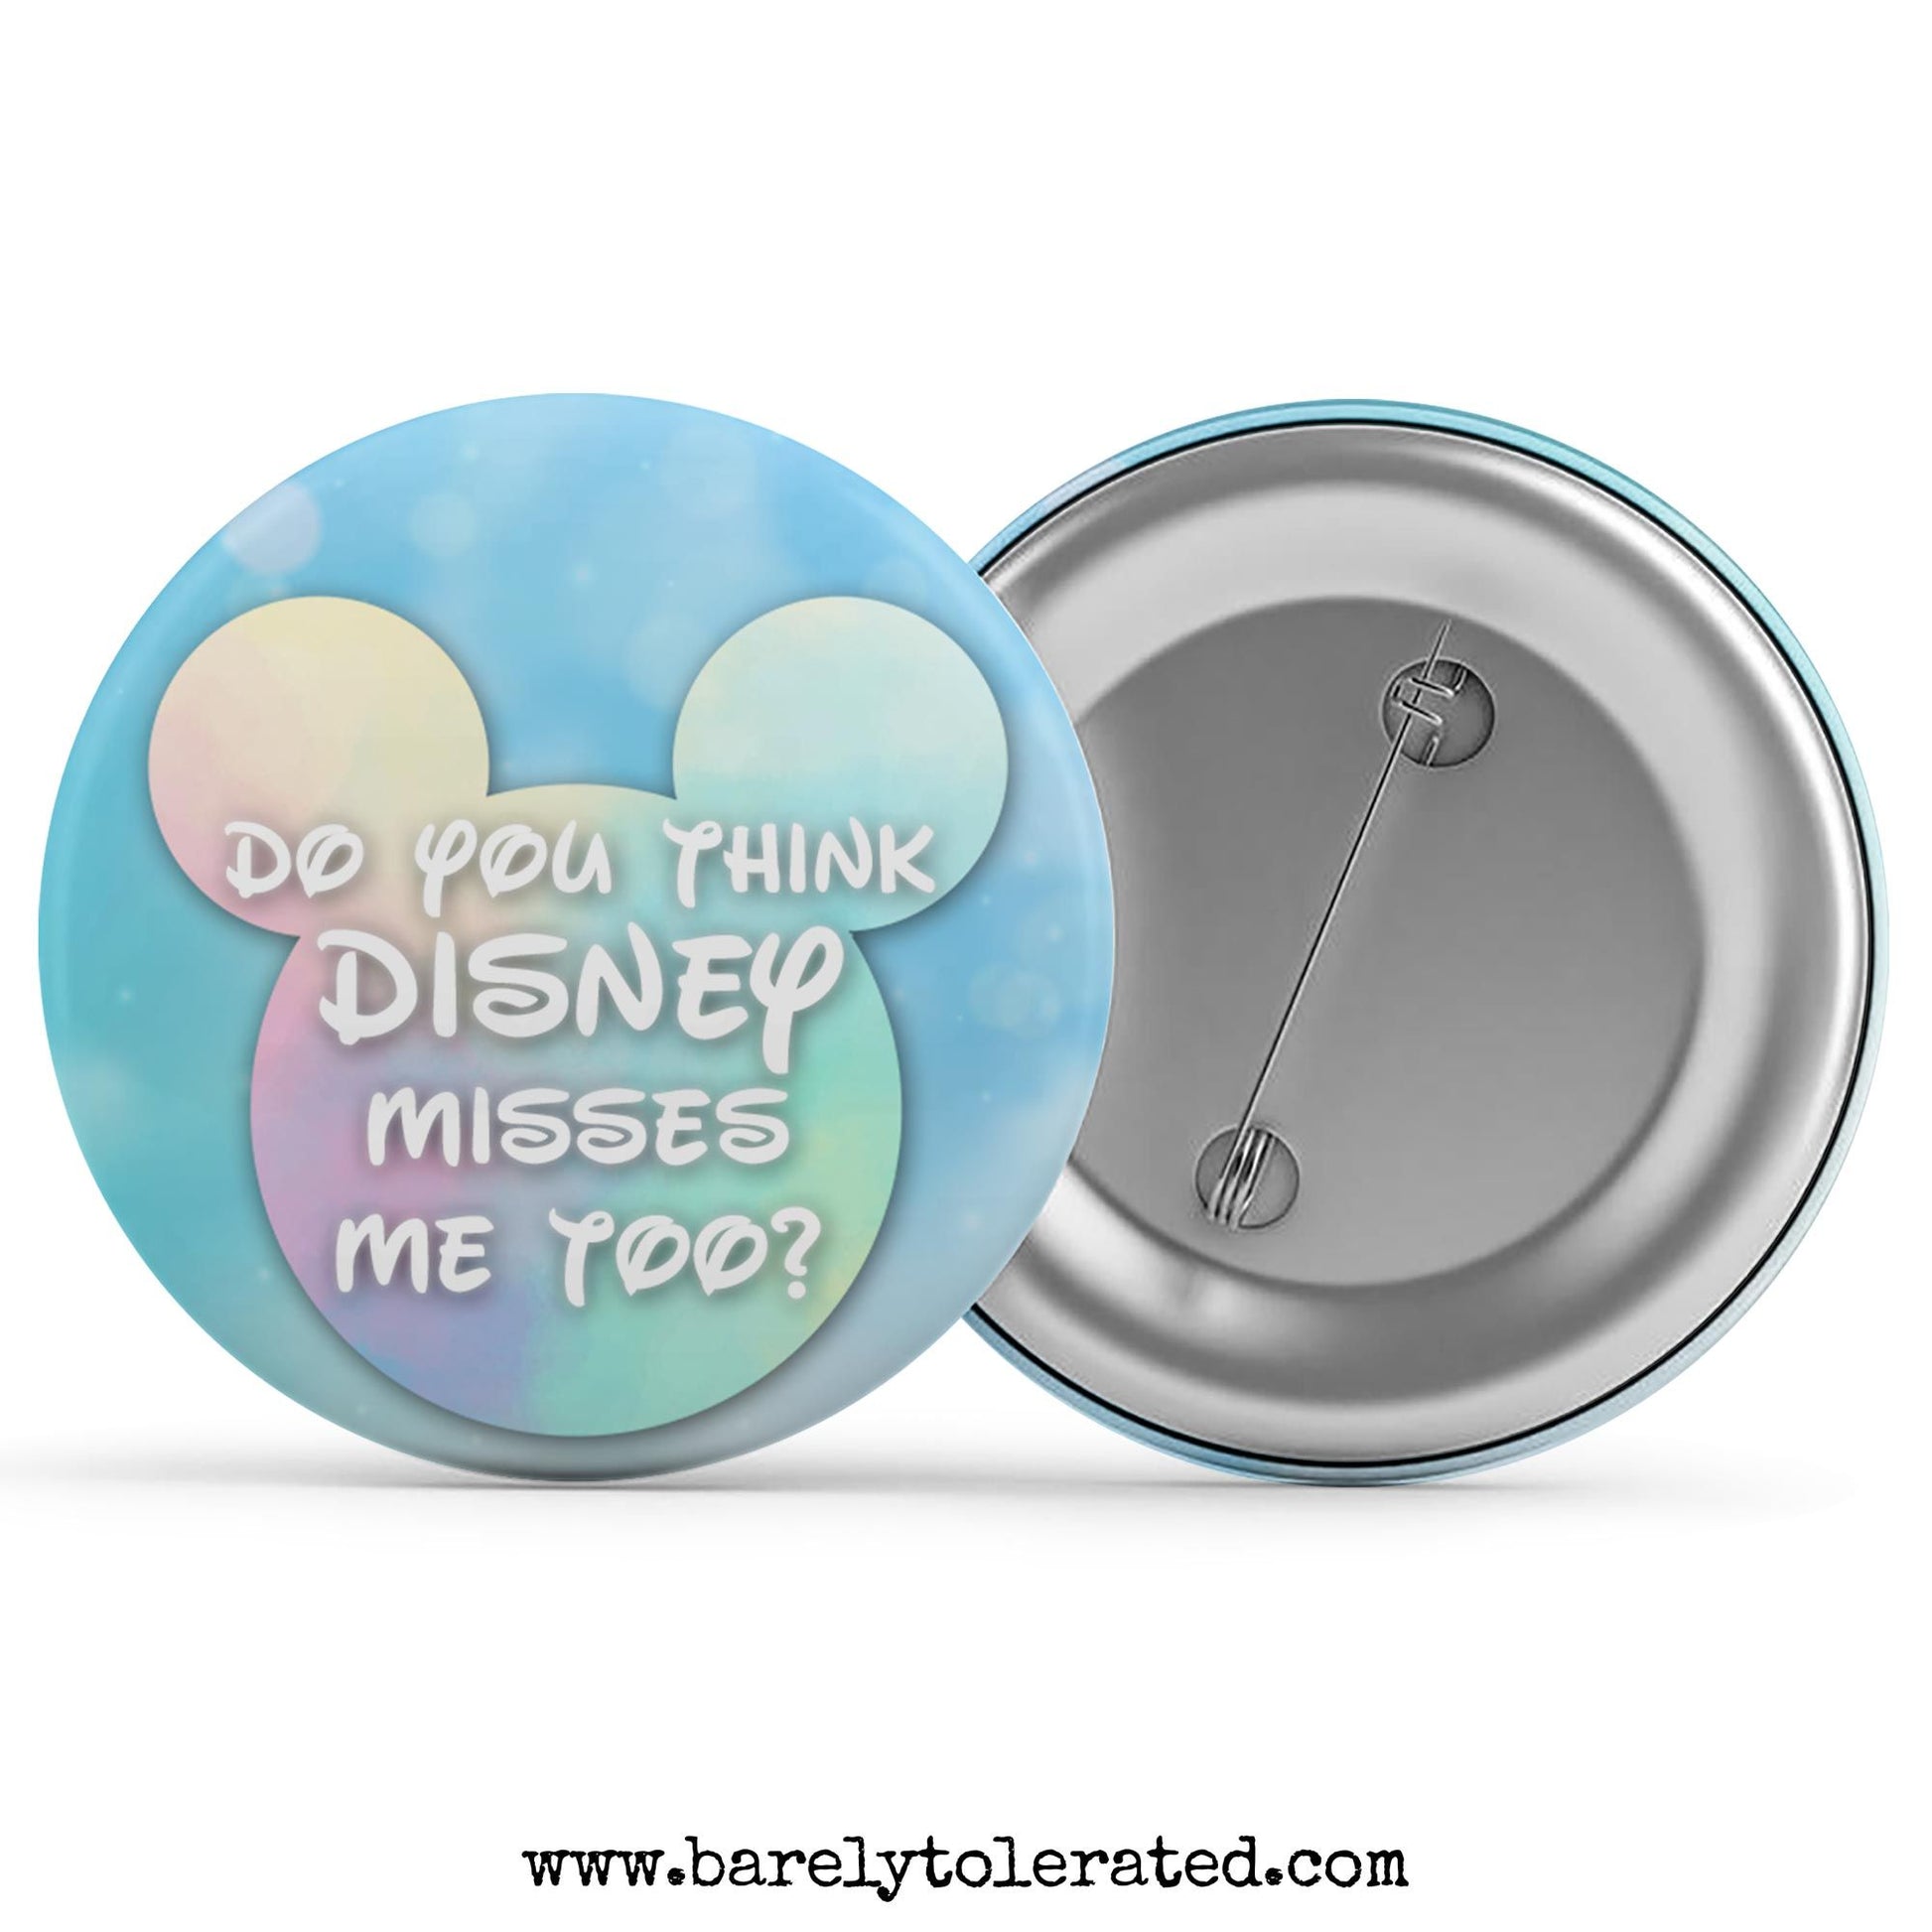 Do You Think Disney Misses Me Too? Image